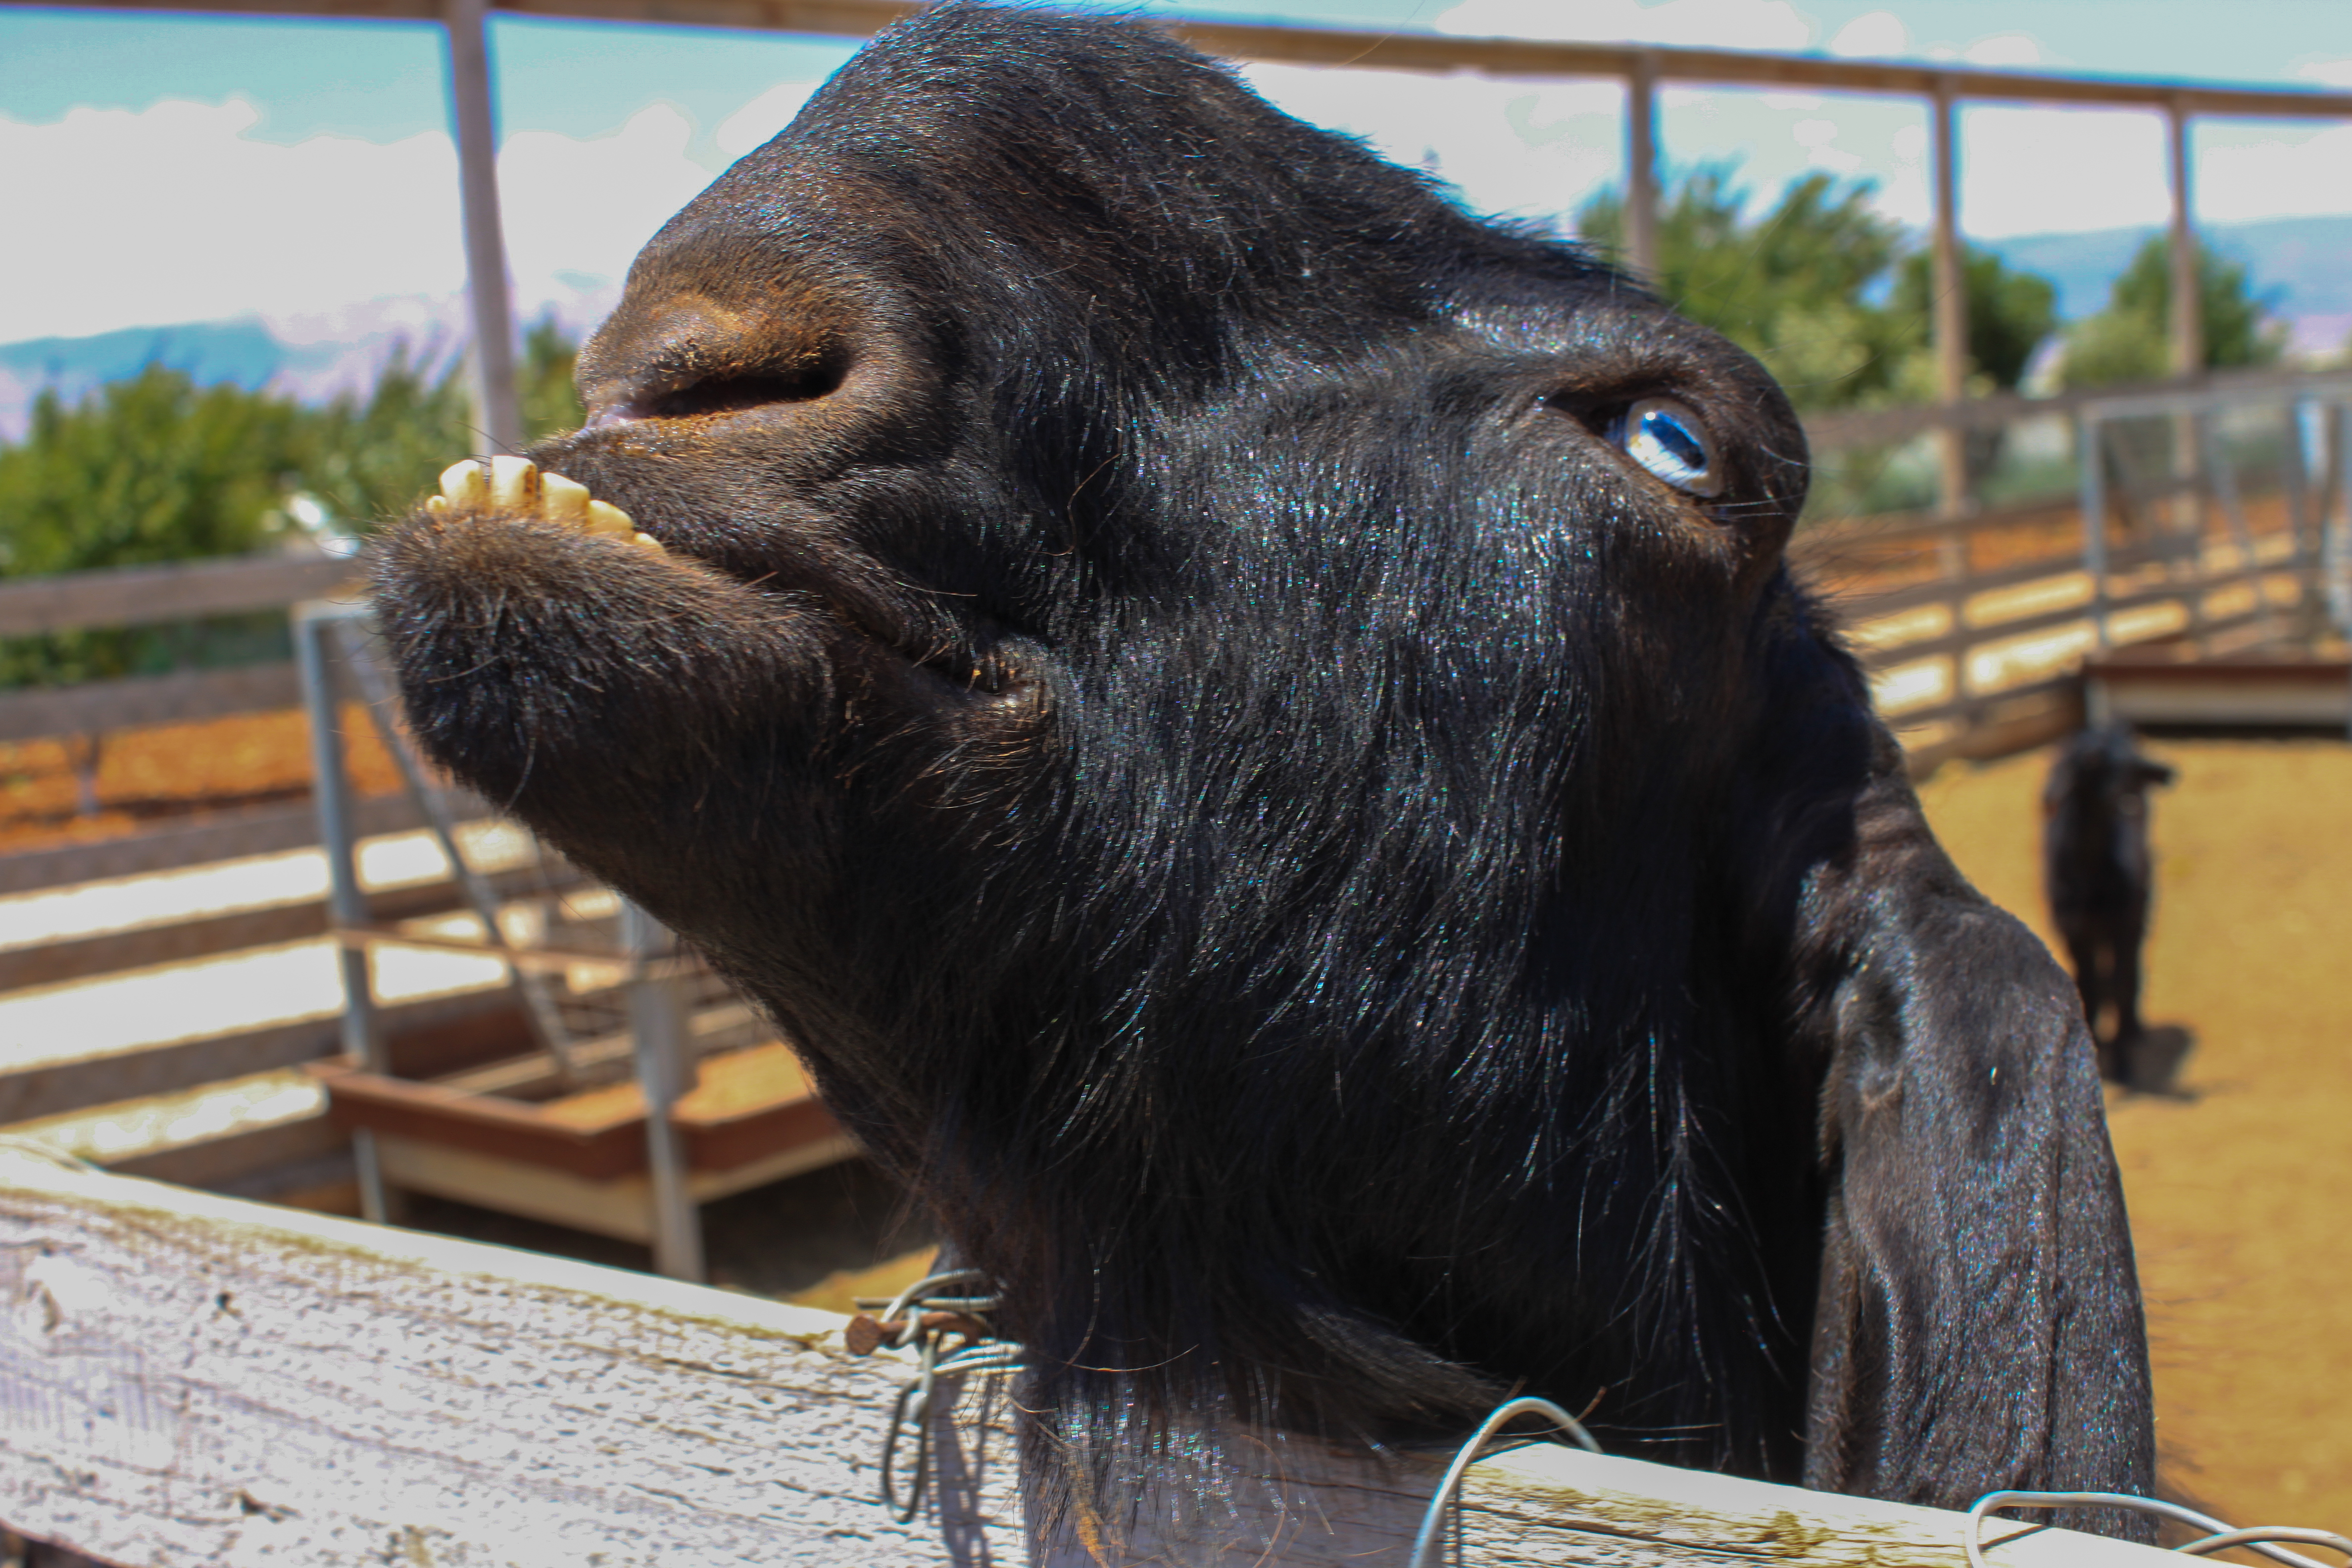 A close-up photo of a goat